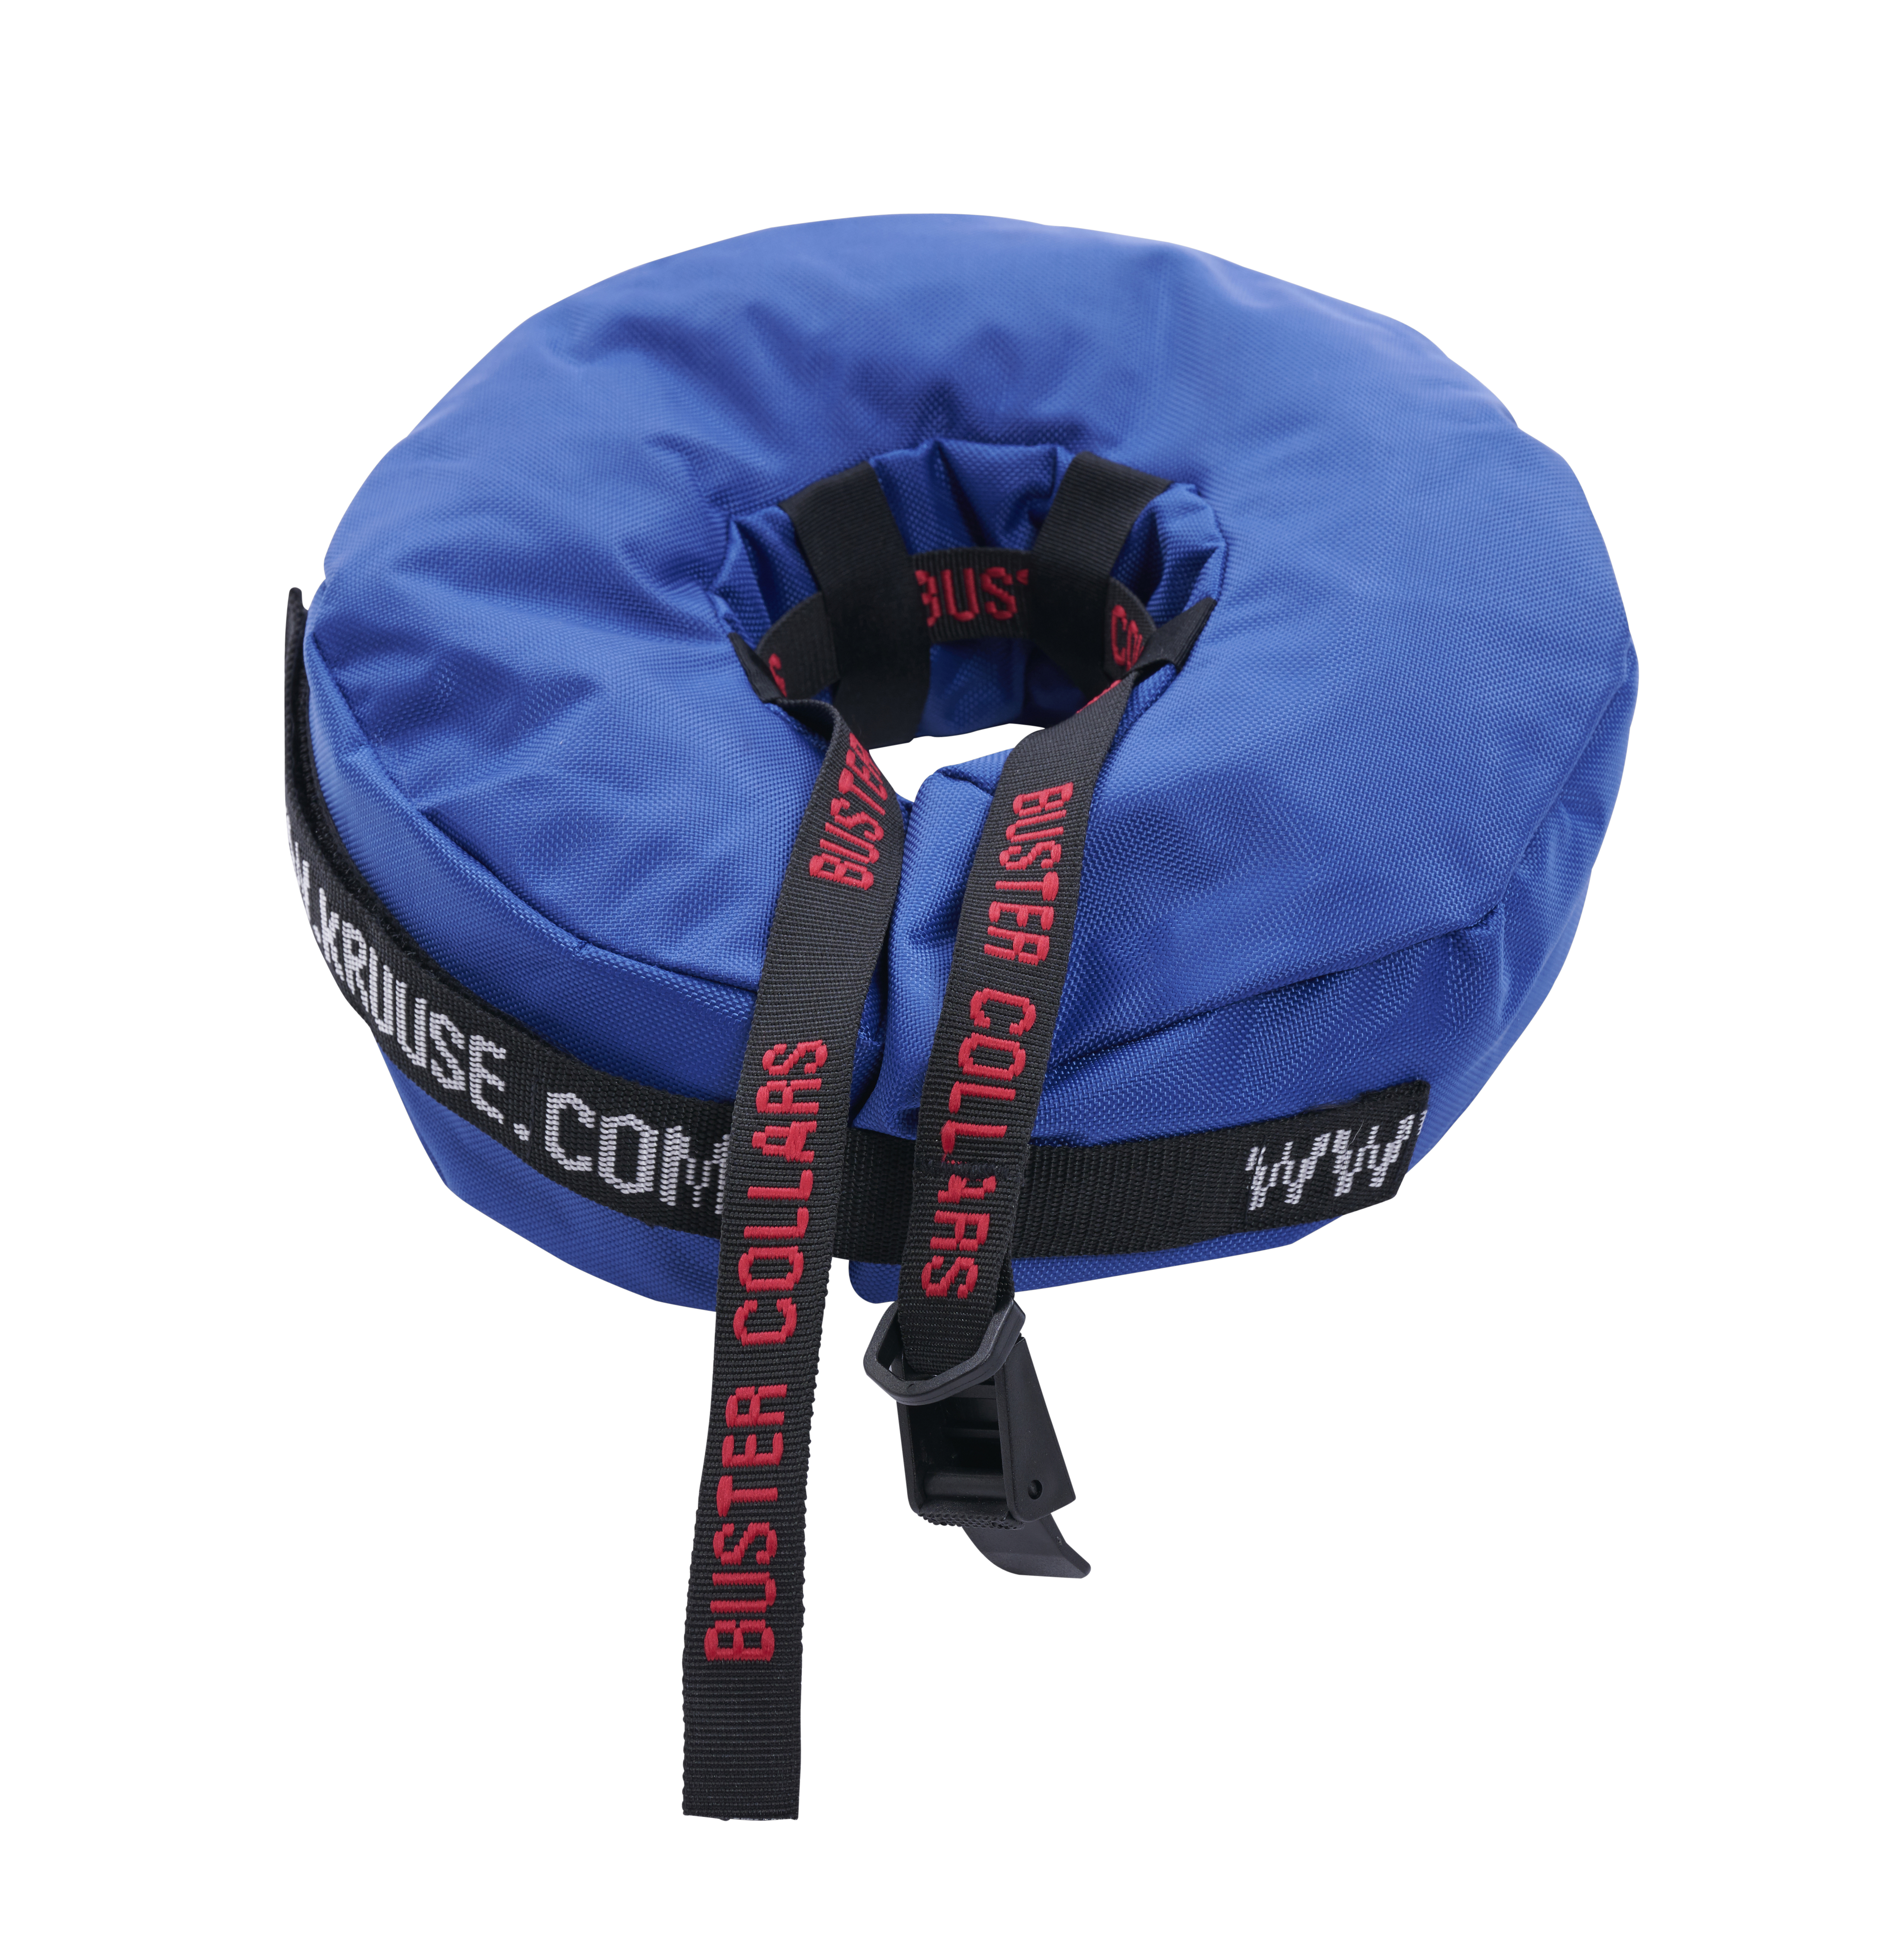 BUSTER COLLAR INFLABLE NYLON AZUL TALLA L (279732)